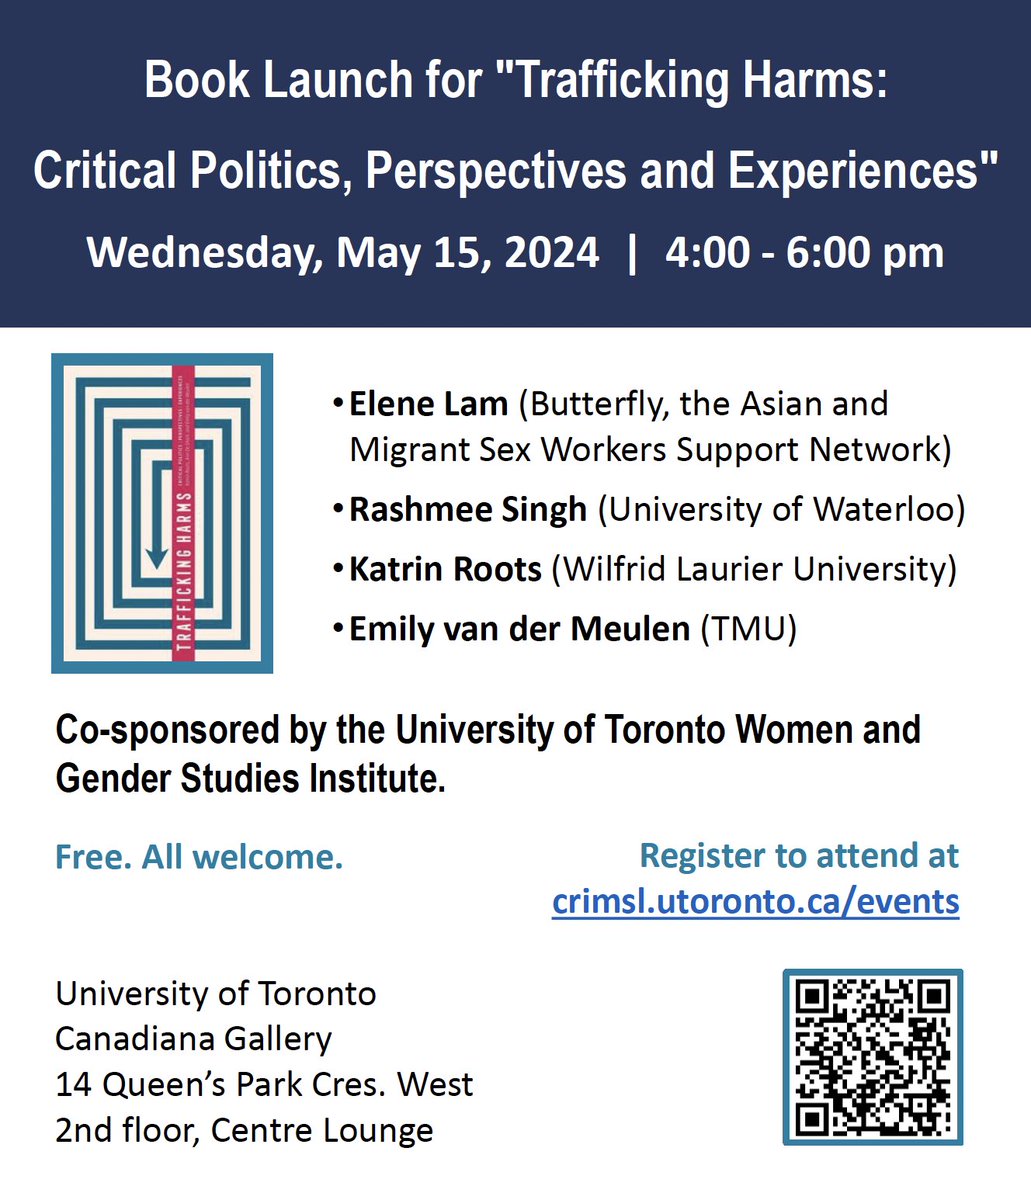 Tomorrow, join Laurier researcher Katrin Roots at the launch event for her new book 'Trafficking Harms: Critical Politics, Perspectives and Experiences.' Register: crimsl.utoronto.ca/events @WLUCriminology